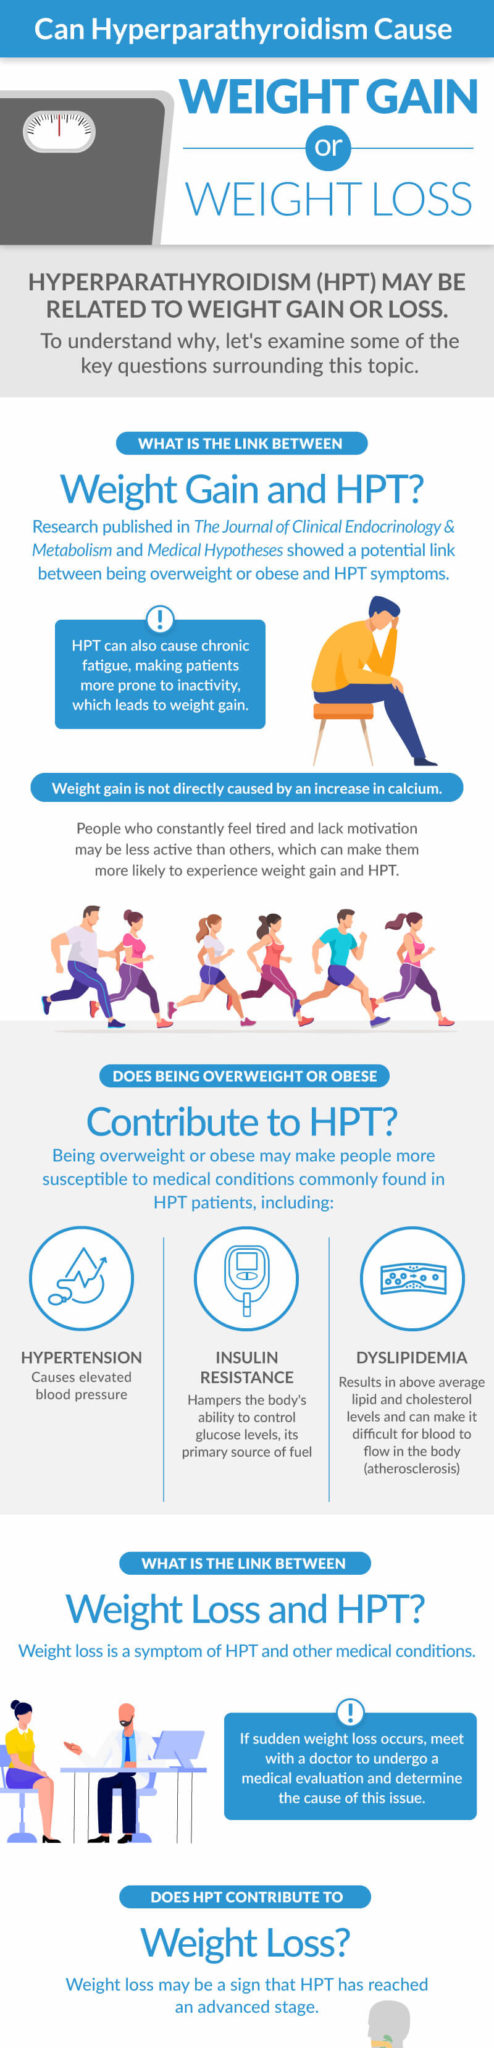 Can Hyperparathyroidism Cause Weight Gain or Weight Loss? infographic top